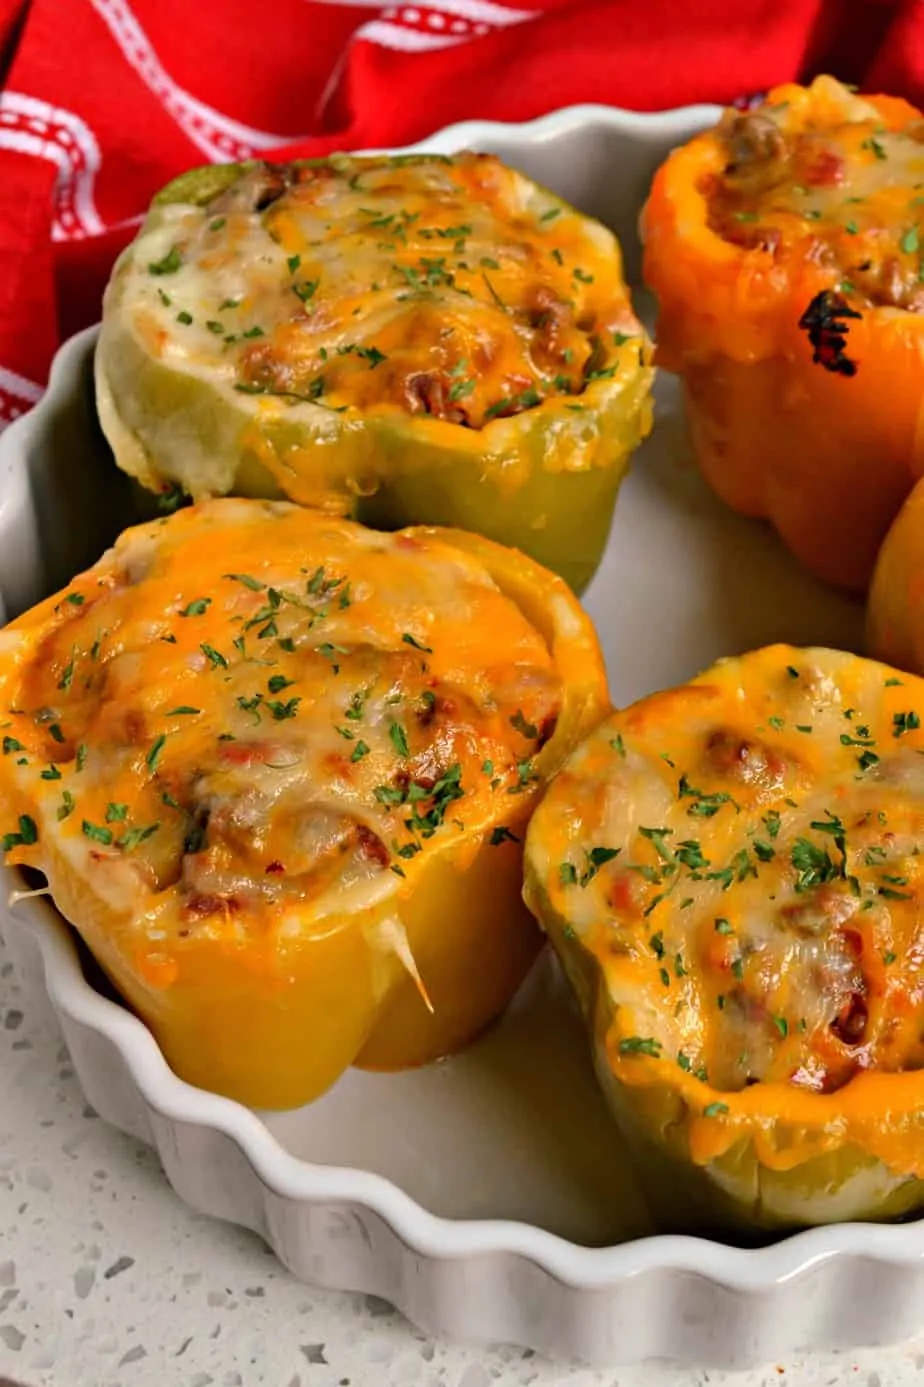 These festive, fun, and easy Mexican Stuffed Peppers are topped with sharp cheddar and zesty pepper jack cheese.